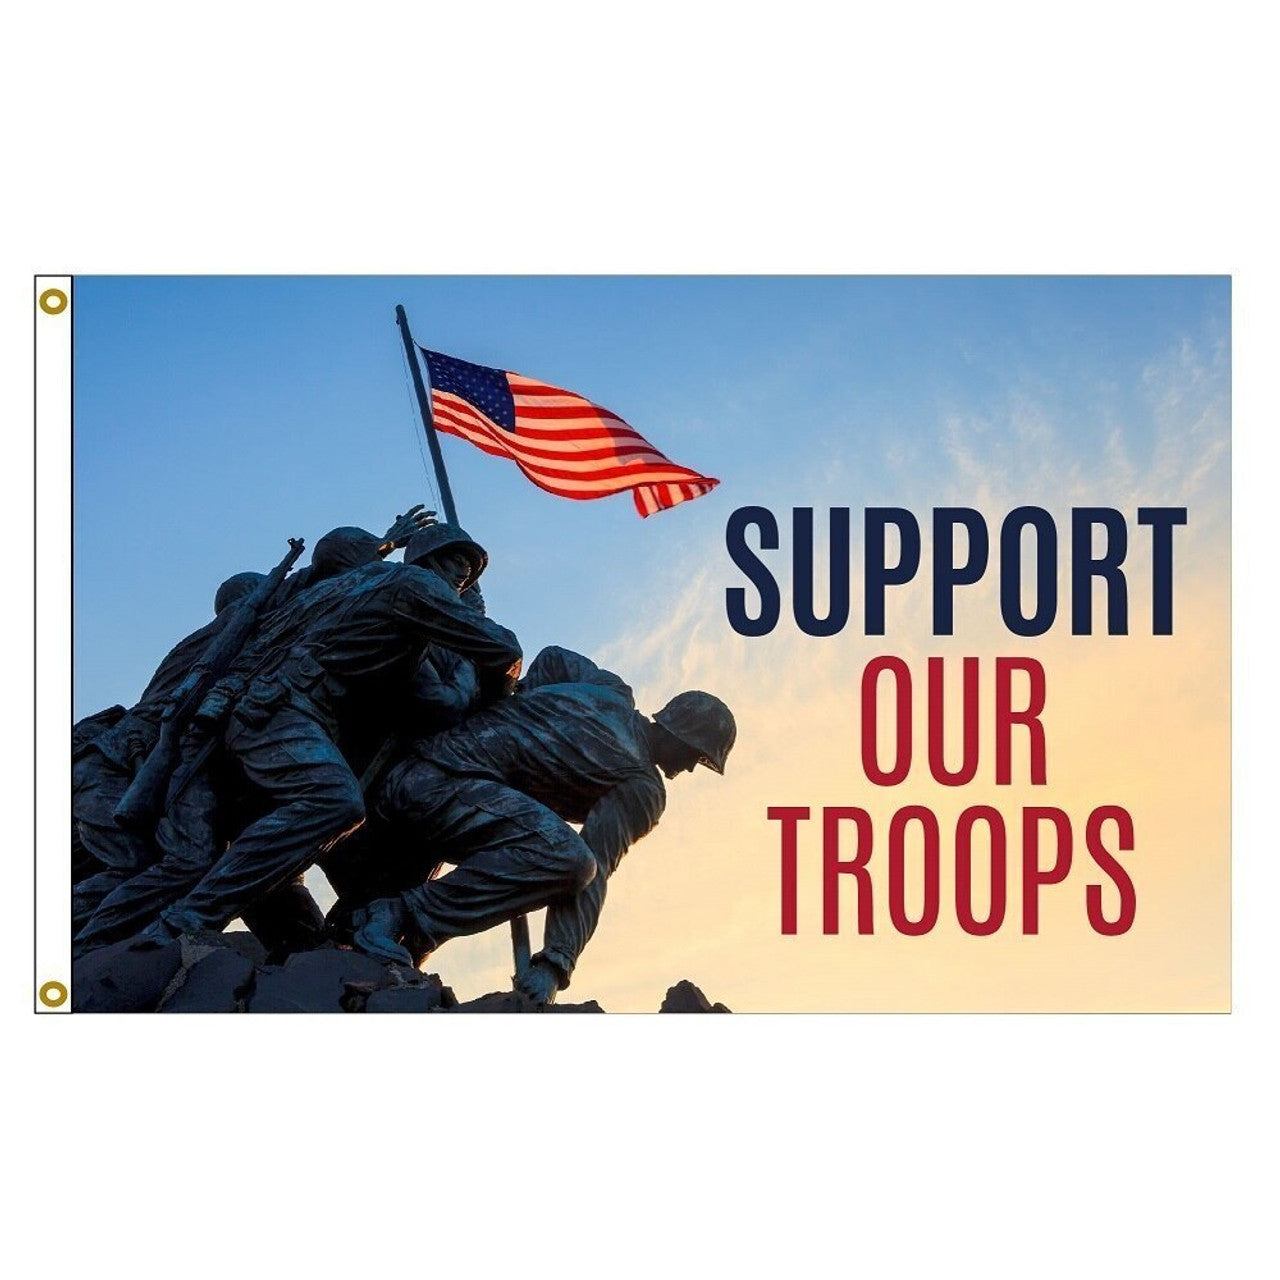 Support Our Troops Flag With Soldiers Planting American Flag 3x5 Flag